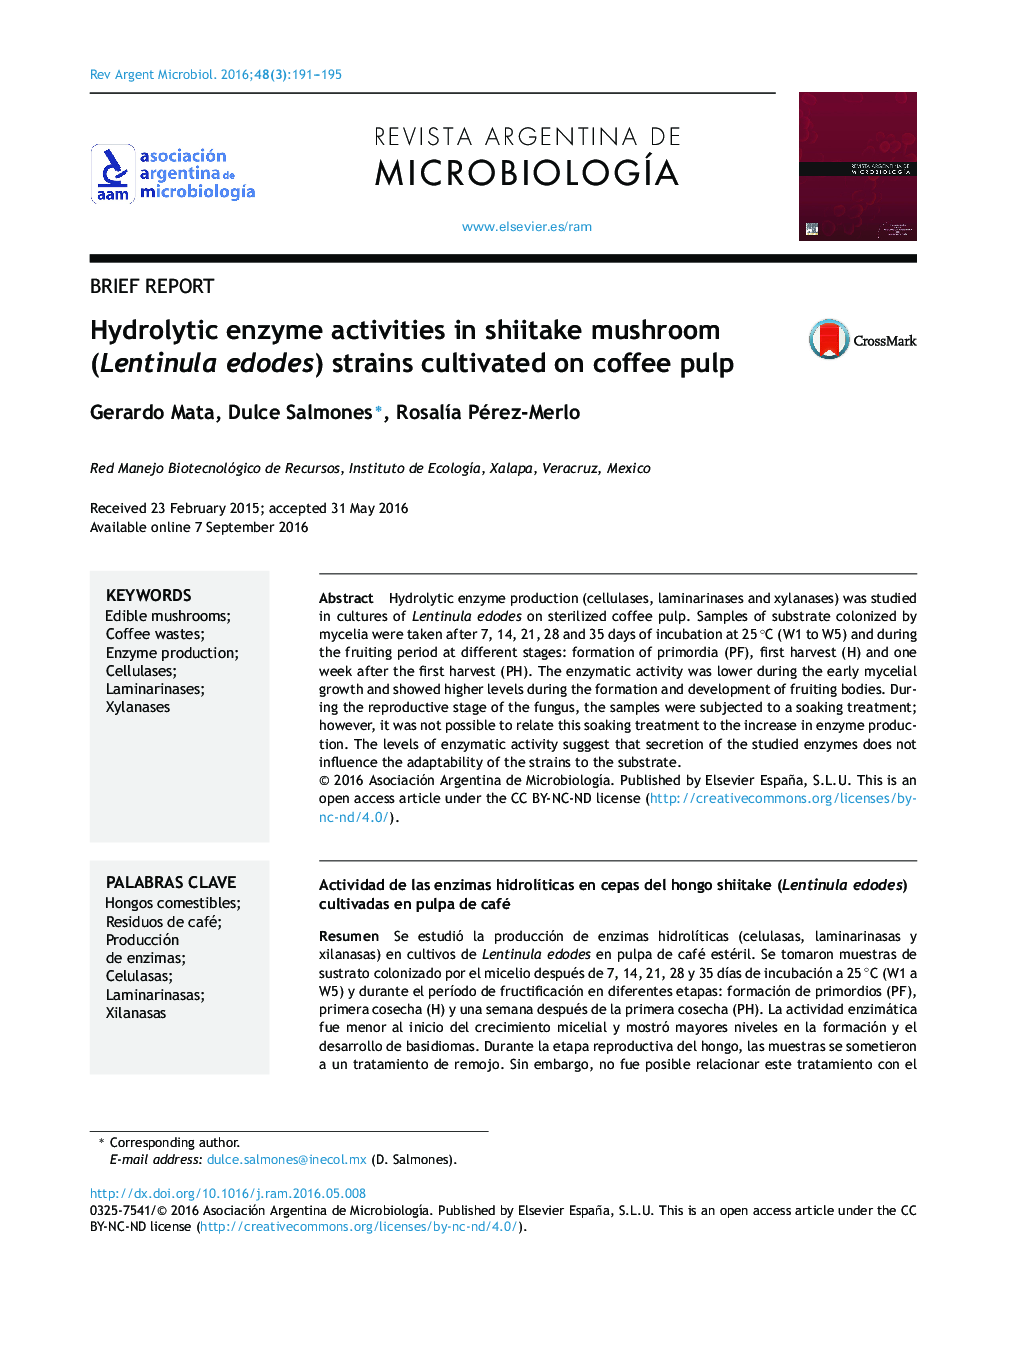 Hydrolytic enzyme activities in shiitake mushroom (Lentinula edodes) strains cultivated on coffee pulp